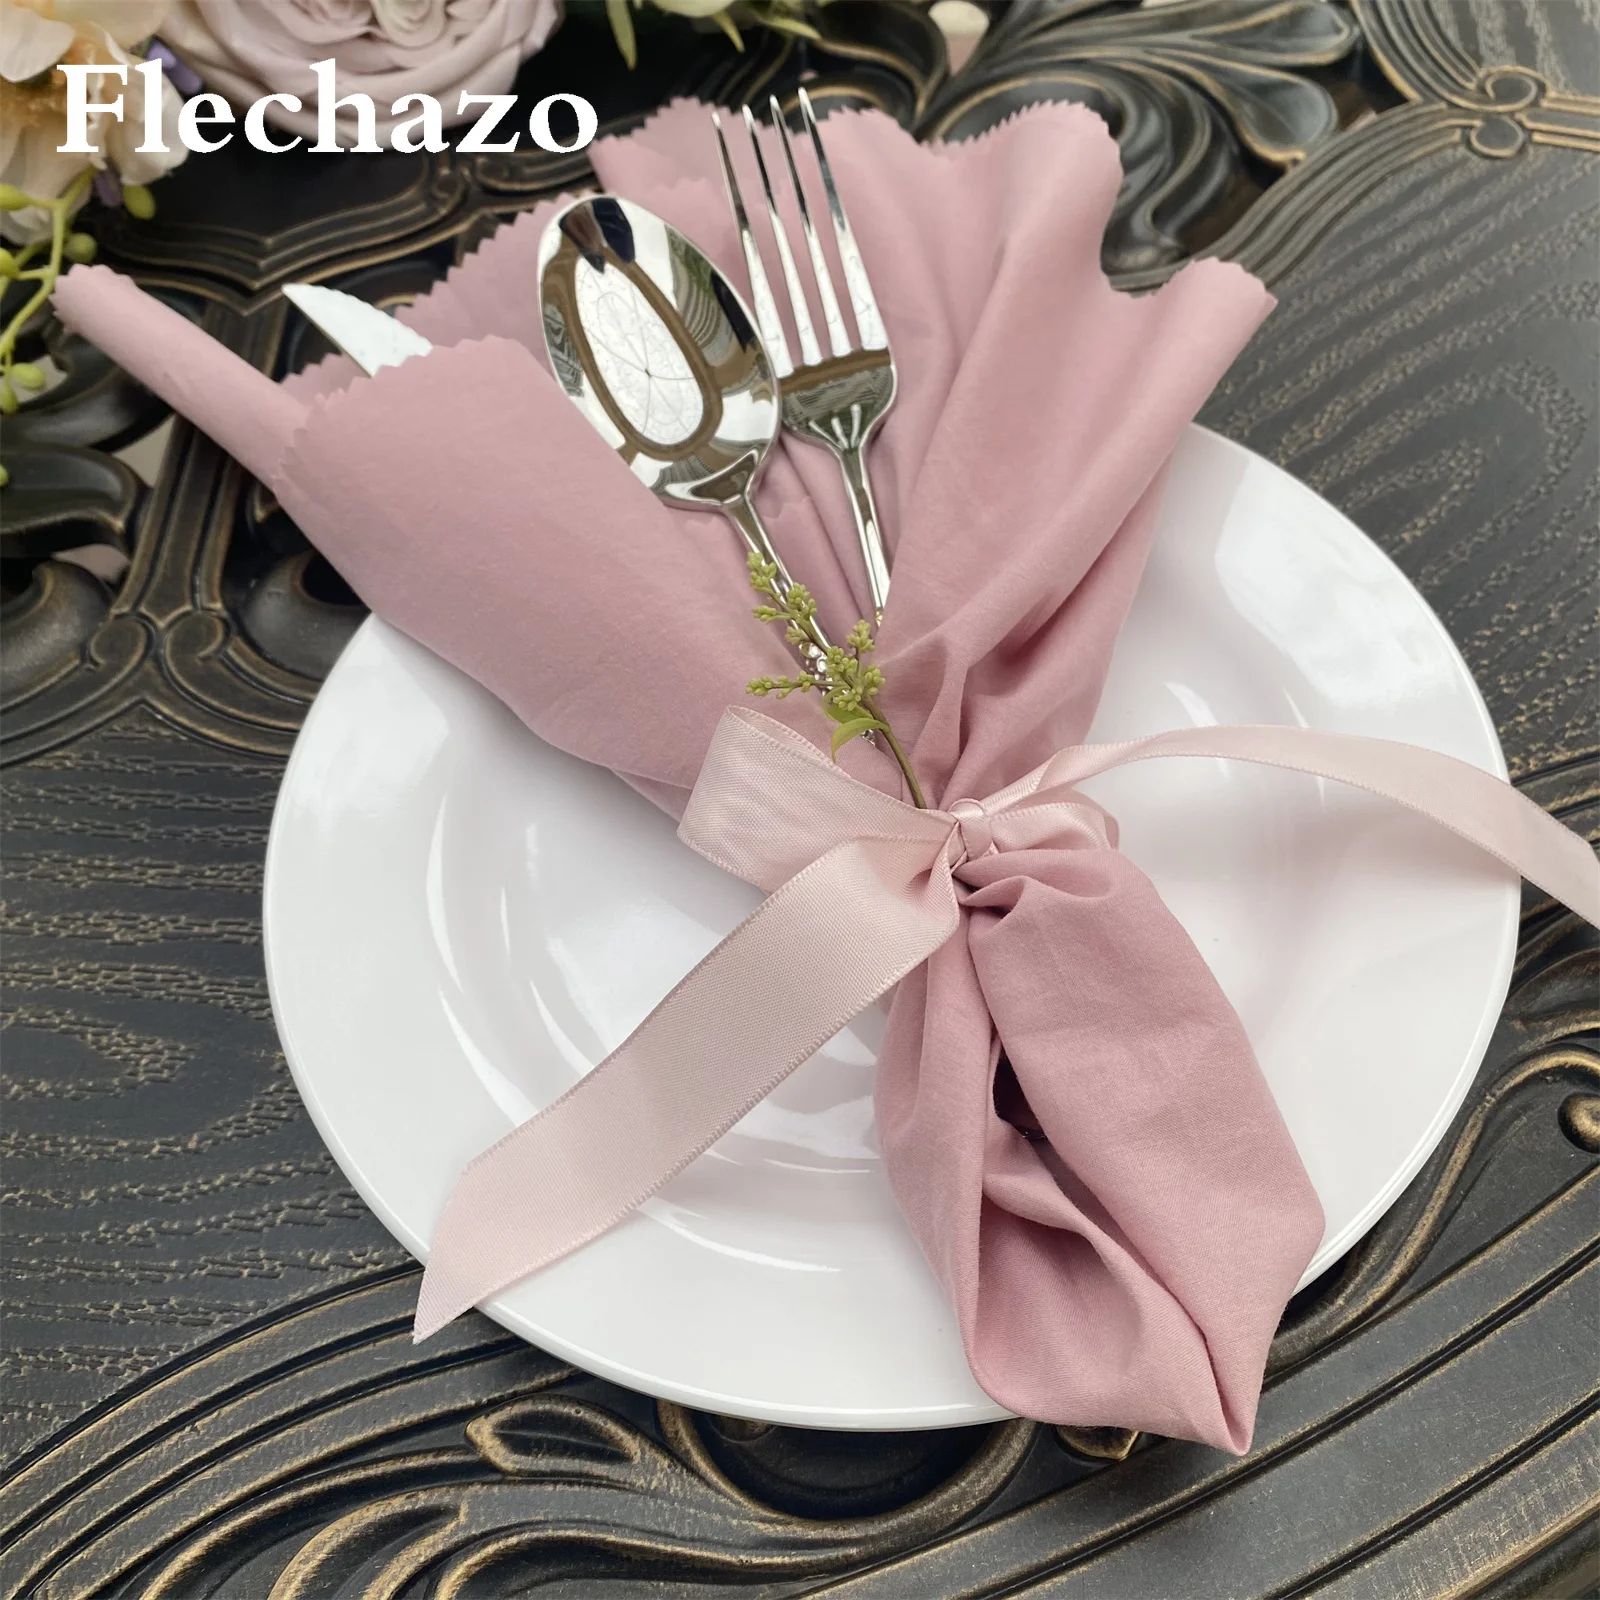 

10pcs Table Napkins 46*46cm Wedding Party Decor Home Cloth Linen Country Dust Pink Cotton Serving Fabric Washable Soft Dinner